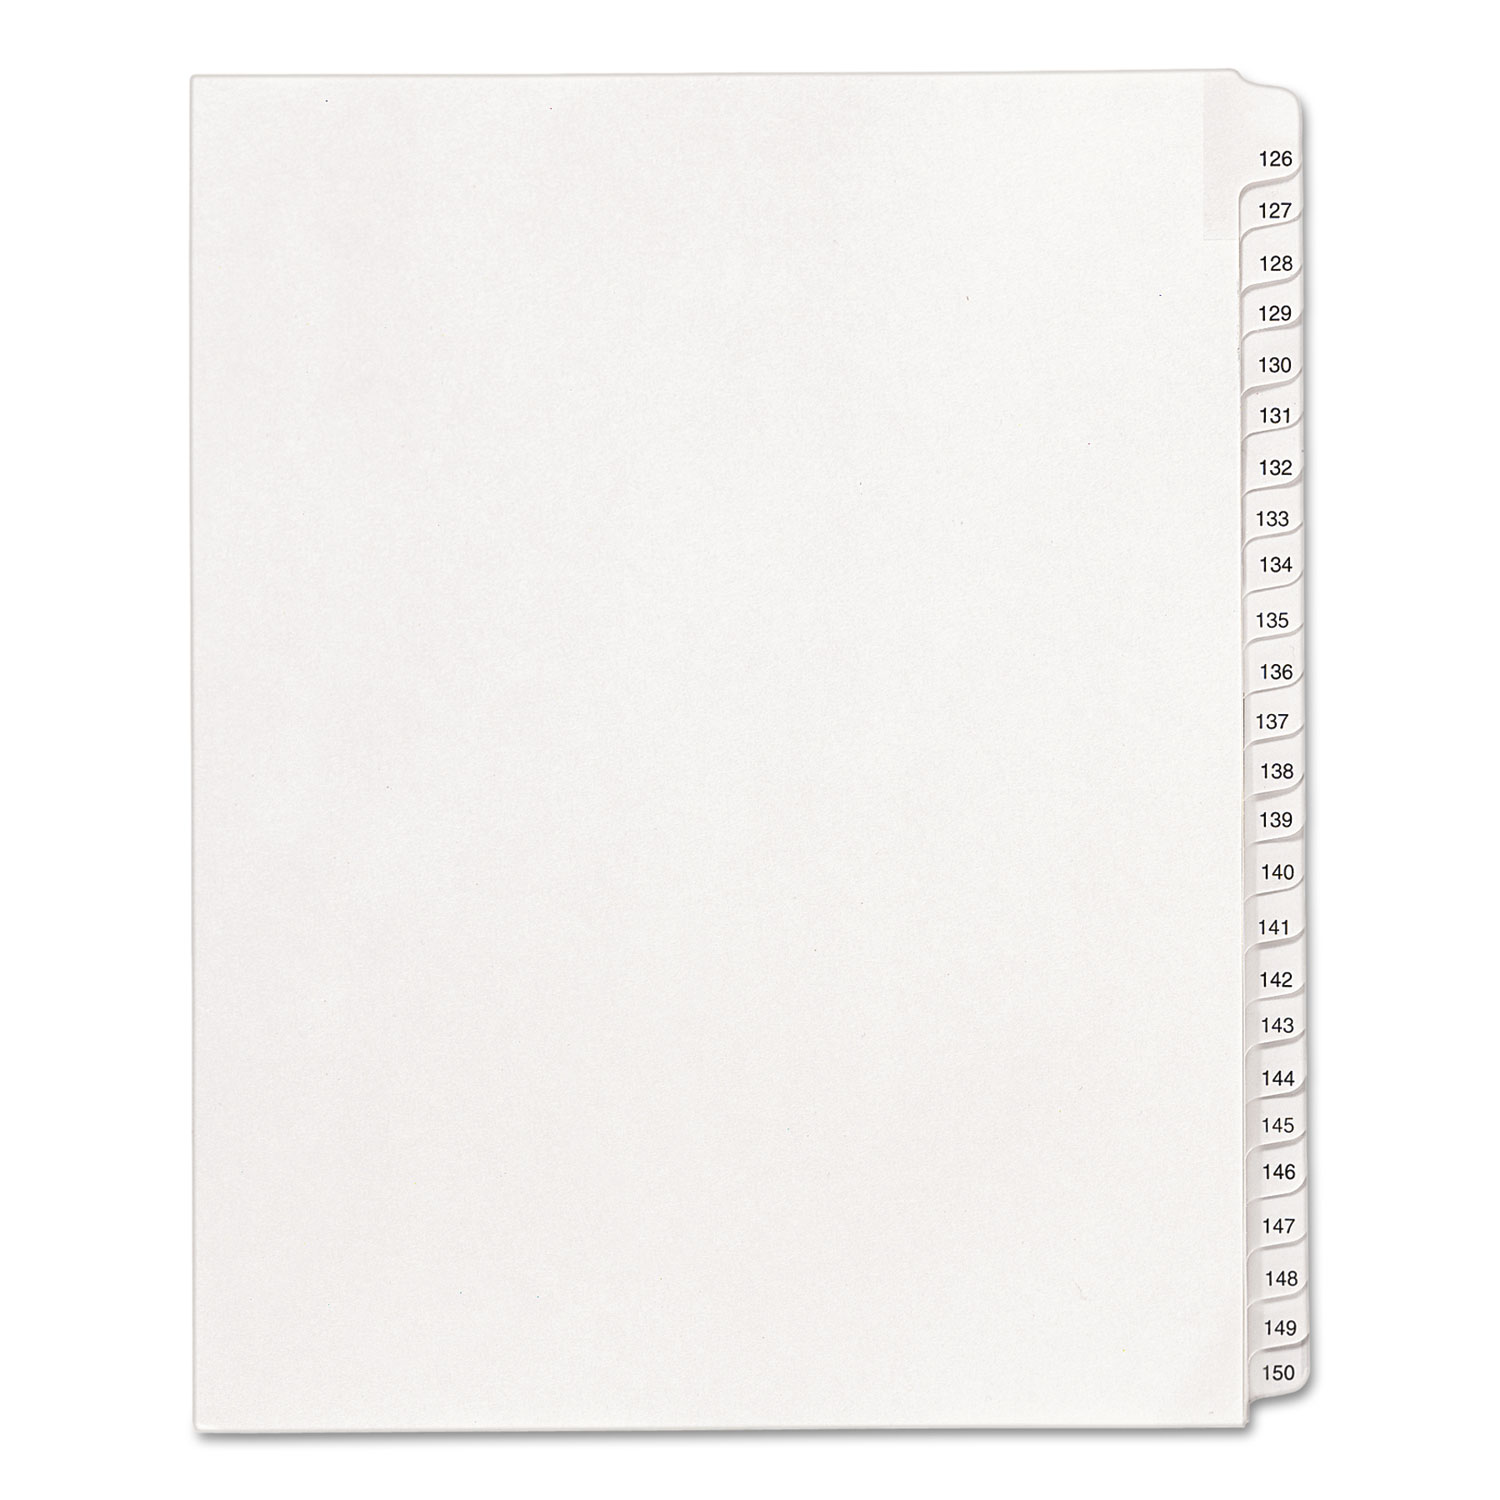  Avery 01706 Preprinted Legal Exhibit Side Tab Index Dividers, Allstate Style, 25-Tab, 126 to 150, 11 x 8.5, White, 1 Set (AVE01706) 